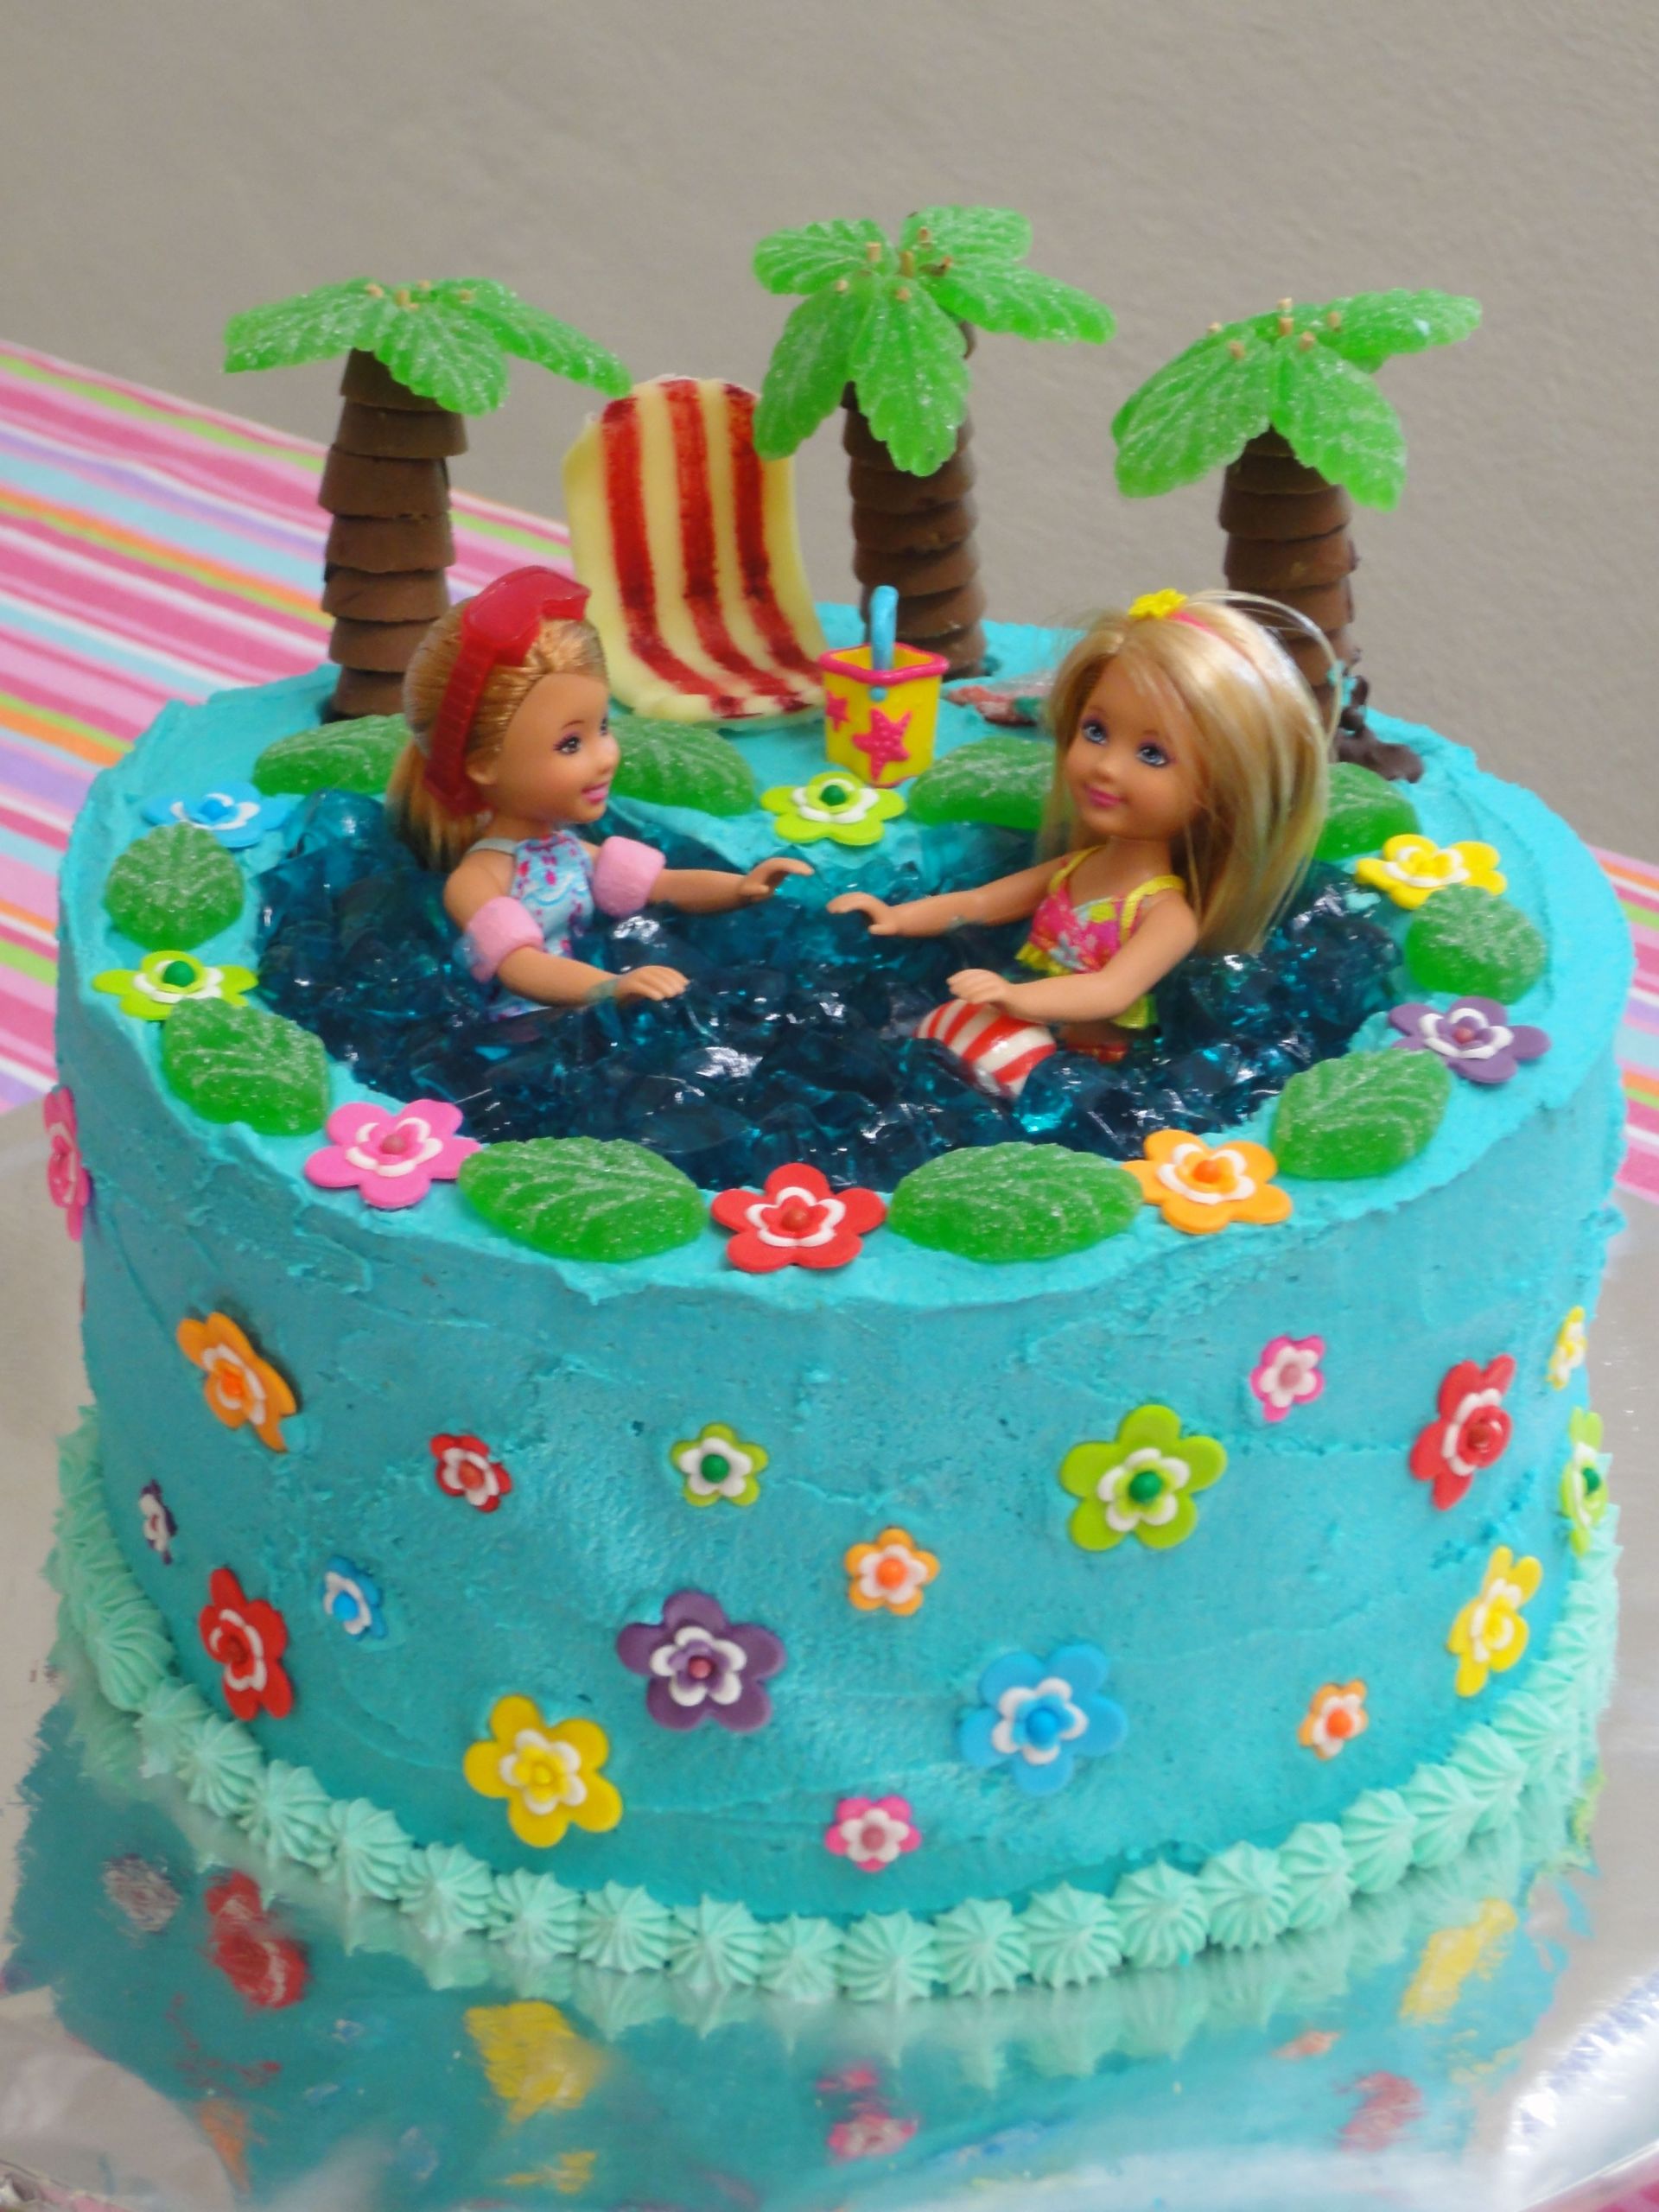 Barbie Pool Party Ideas
 Barbie pool party birthday cake made by me